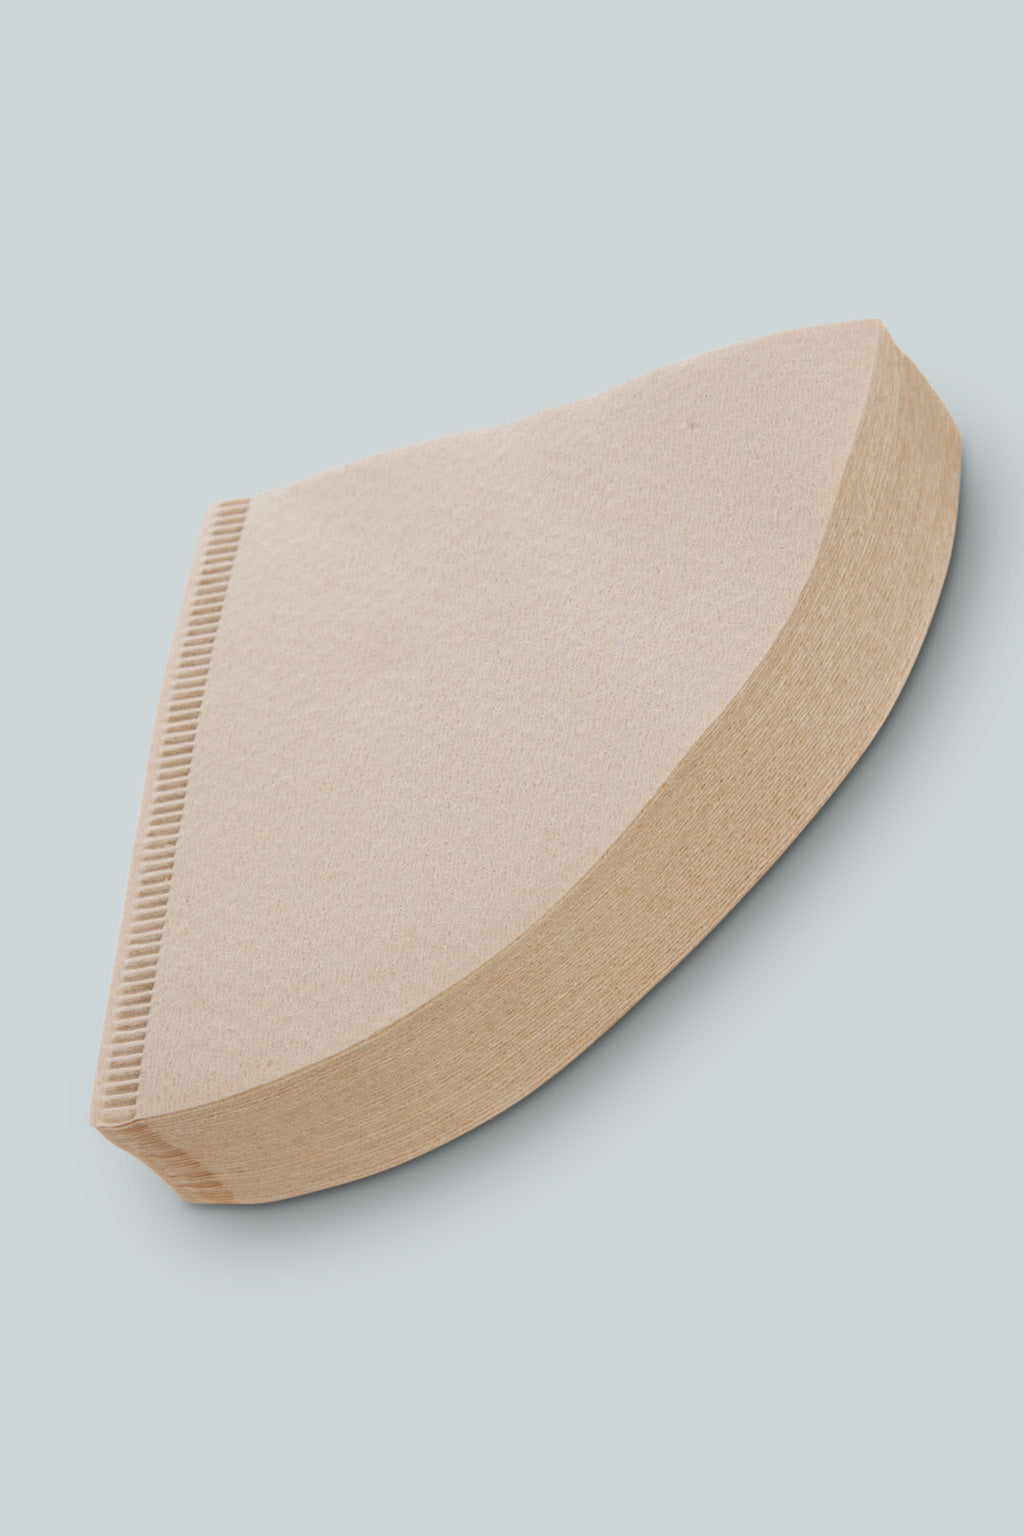 Hario V60 Brown Coffee Filter Papers